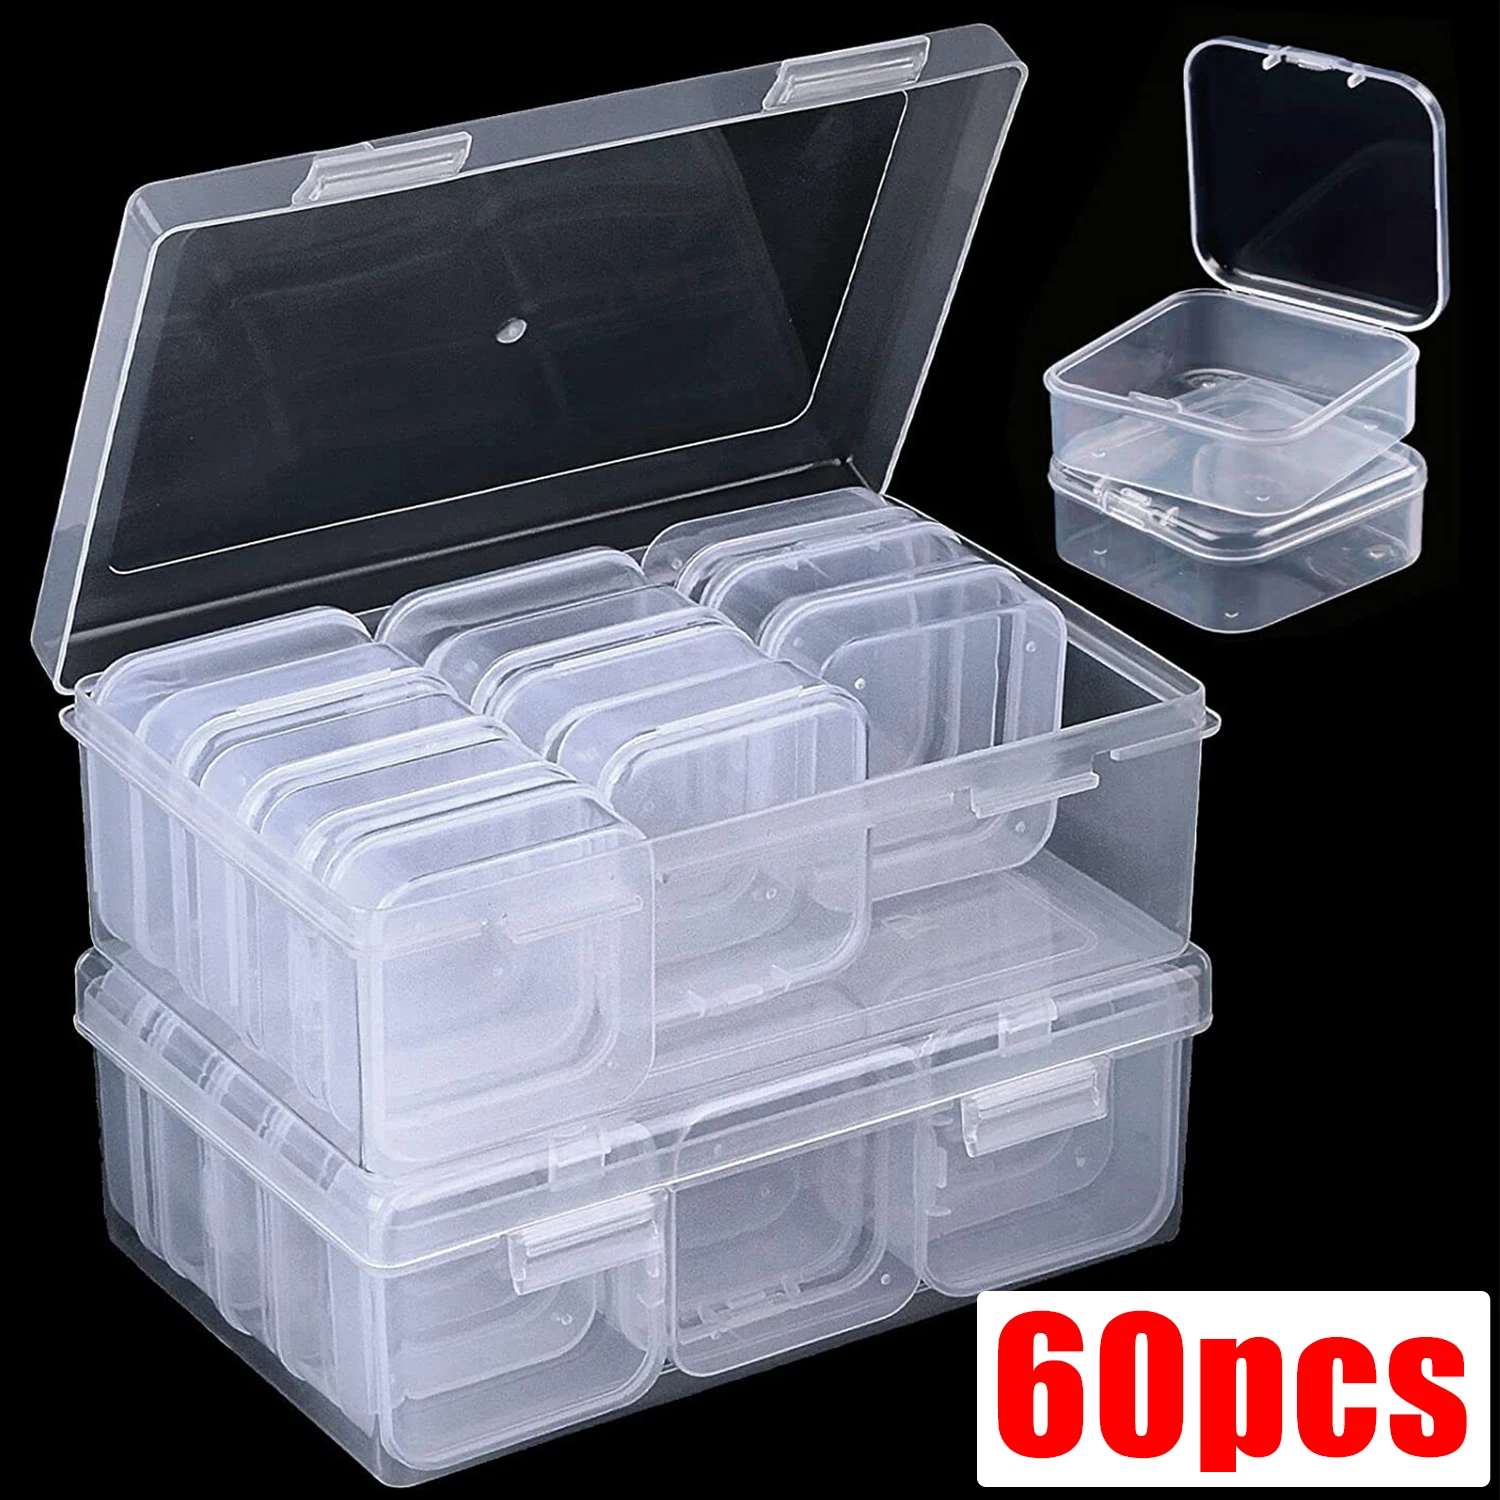 60 Packs Clear Small Plastic Containers Transparent Storage Box with Hinged Lid for Items Crafts Jewelry Package Clear Cases 24 grids clear plastic box storage container jewelry box with lid